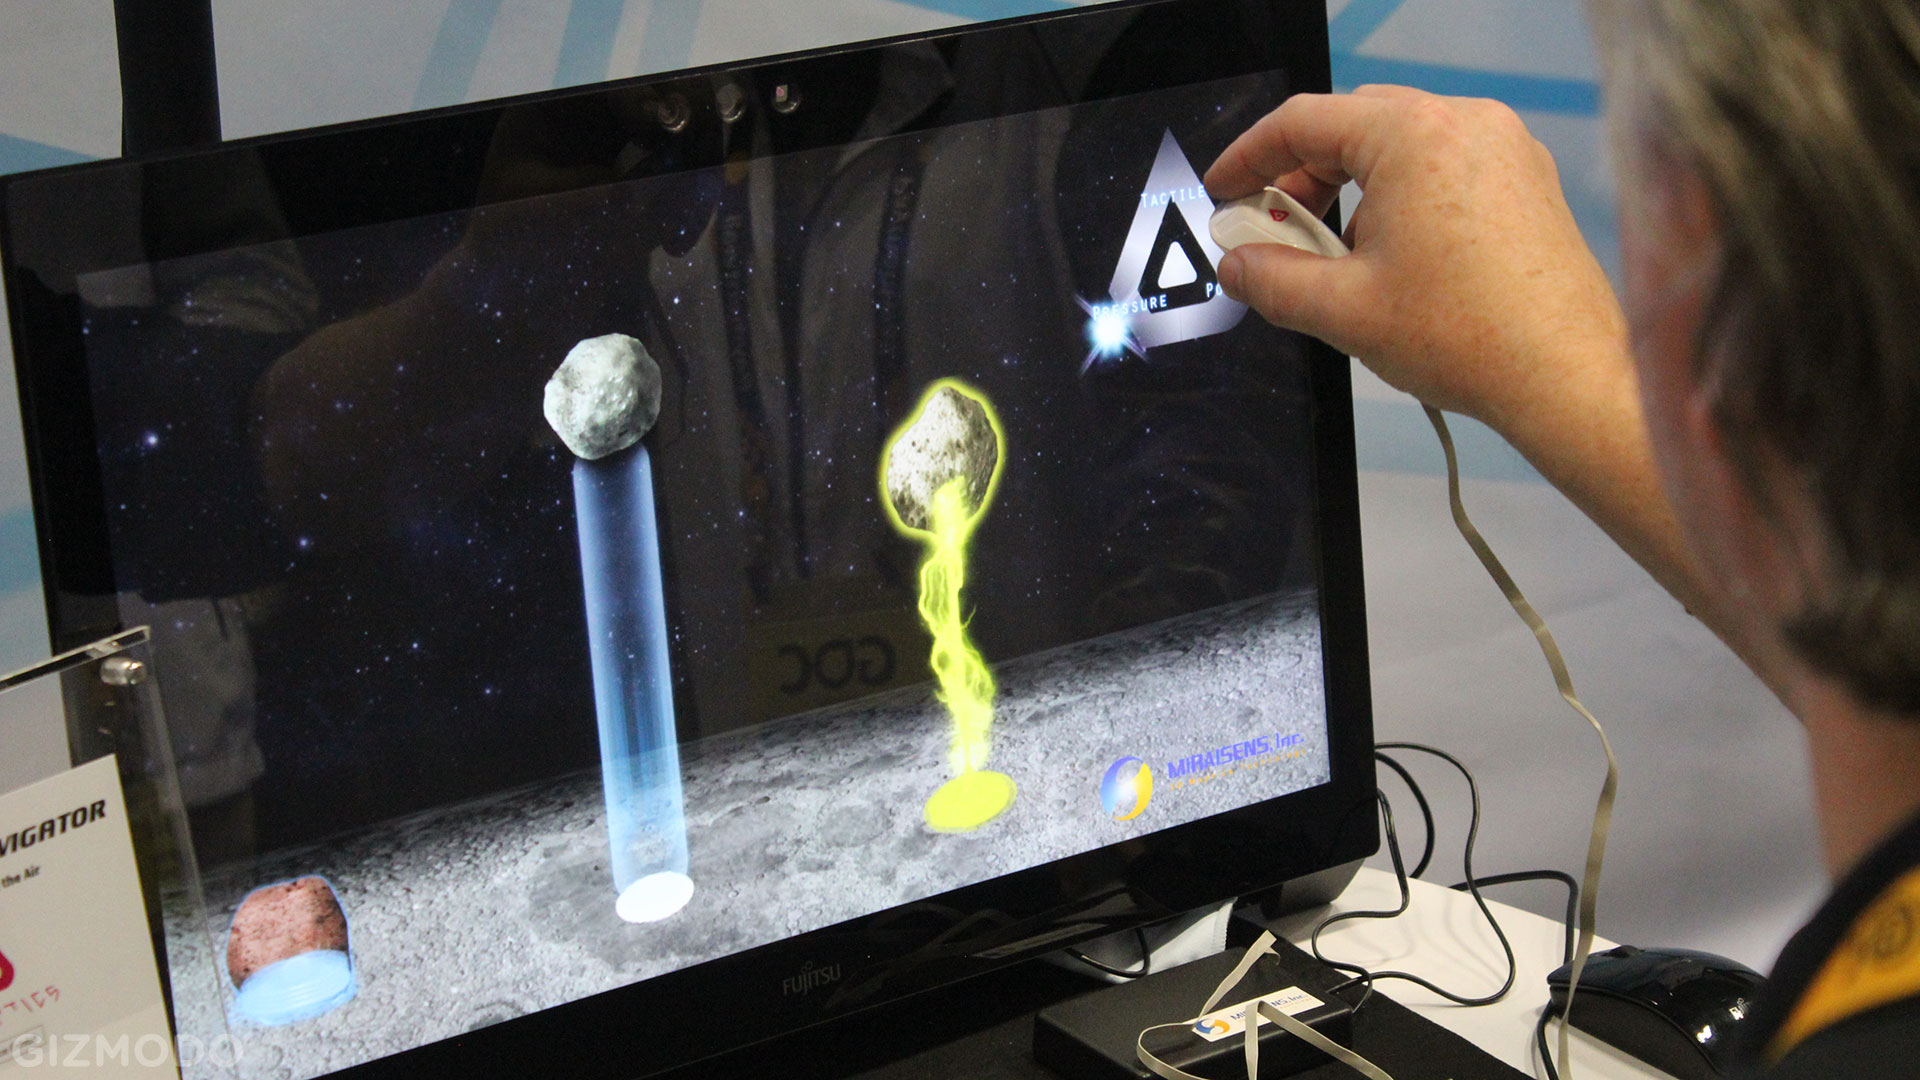 5 Ludicrous Controllers That Help You Touch The Virtual World